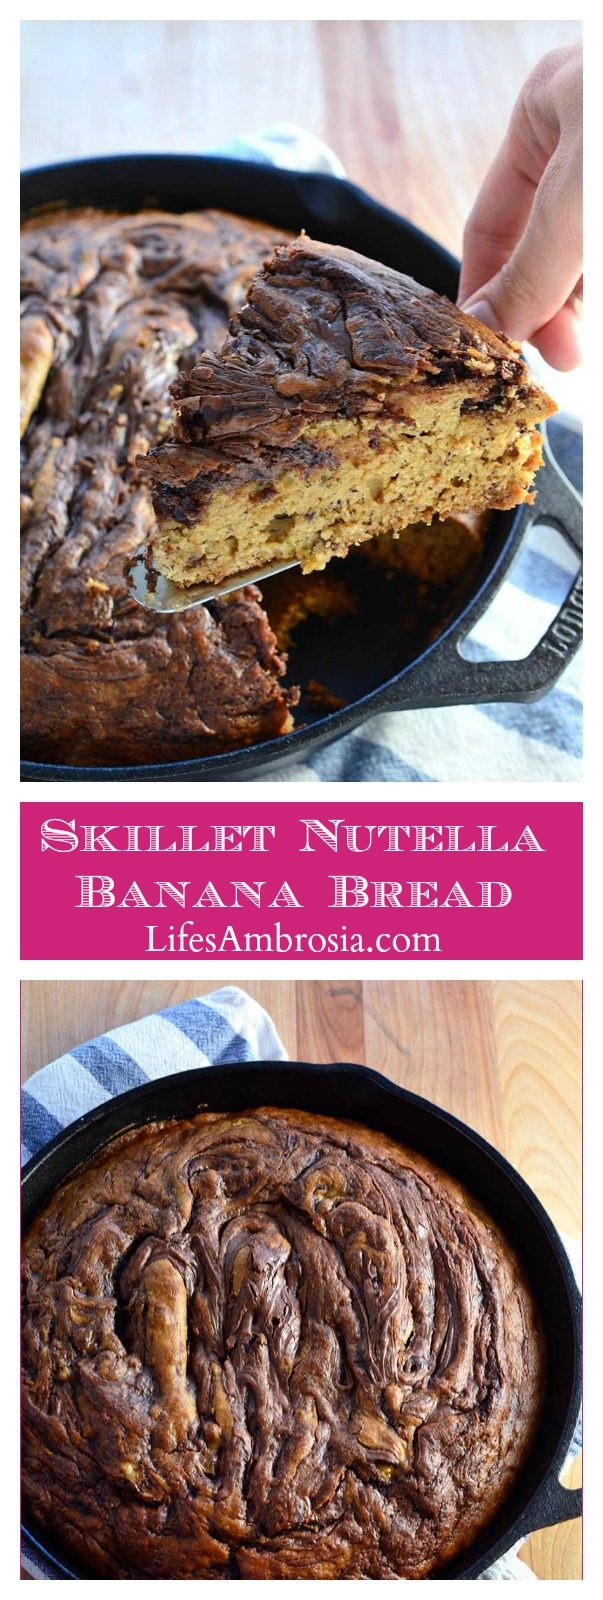 This skillet Nutella banana bread is moist, decadent and loaded with bananas and Nutella. It makes a great breakfast AND dessert.